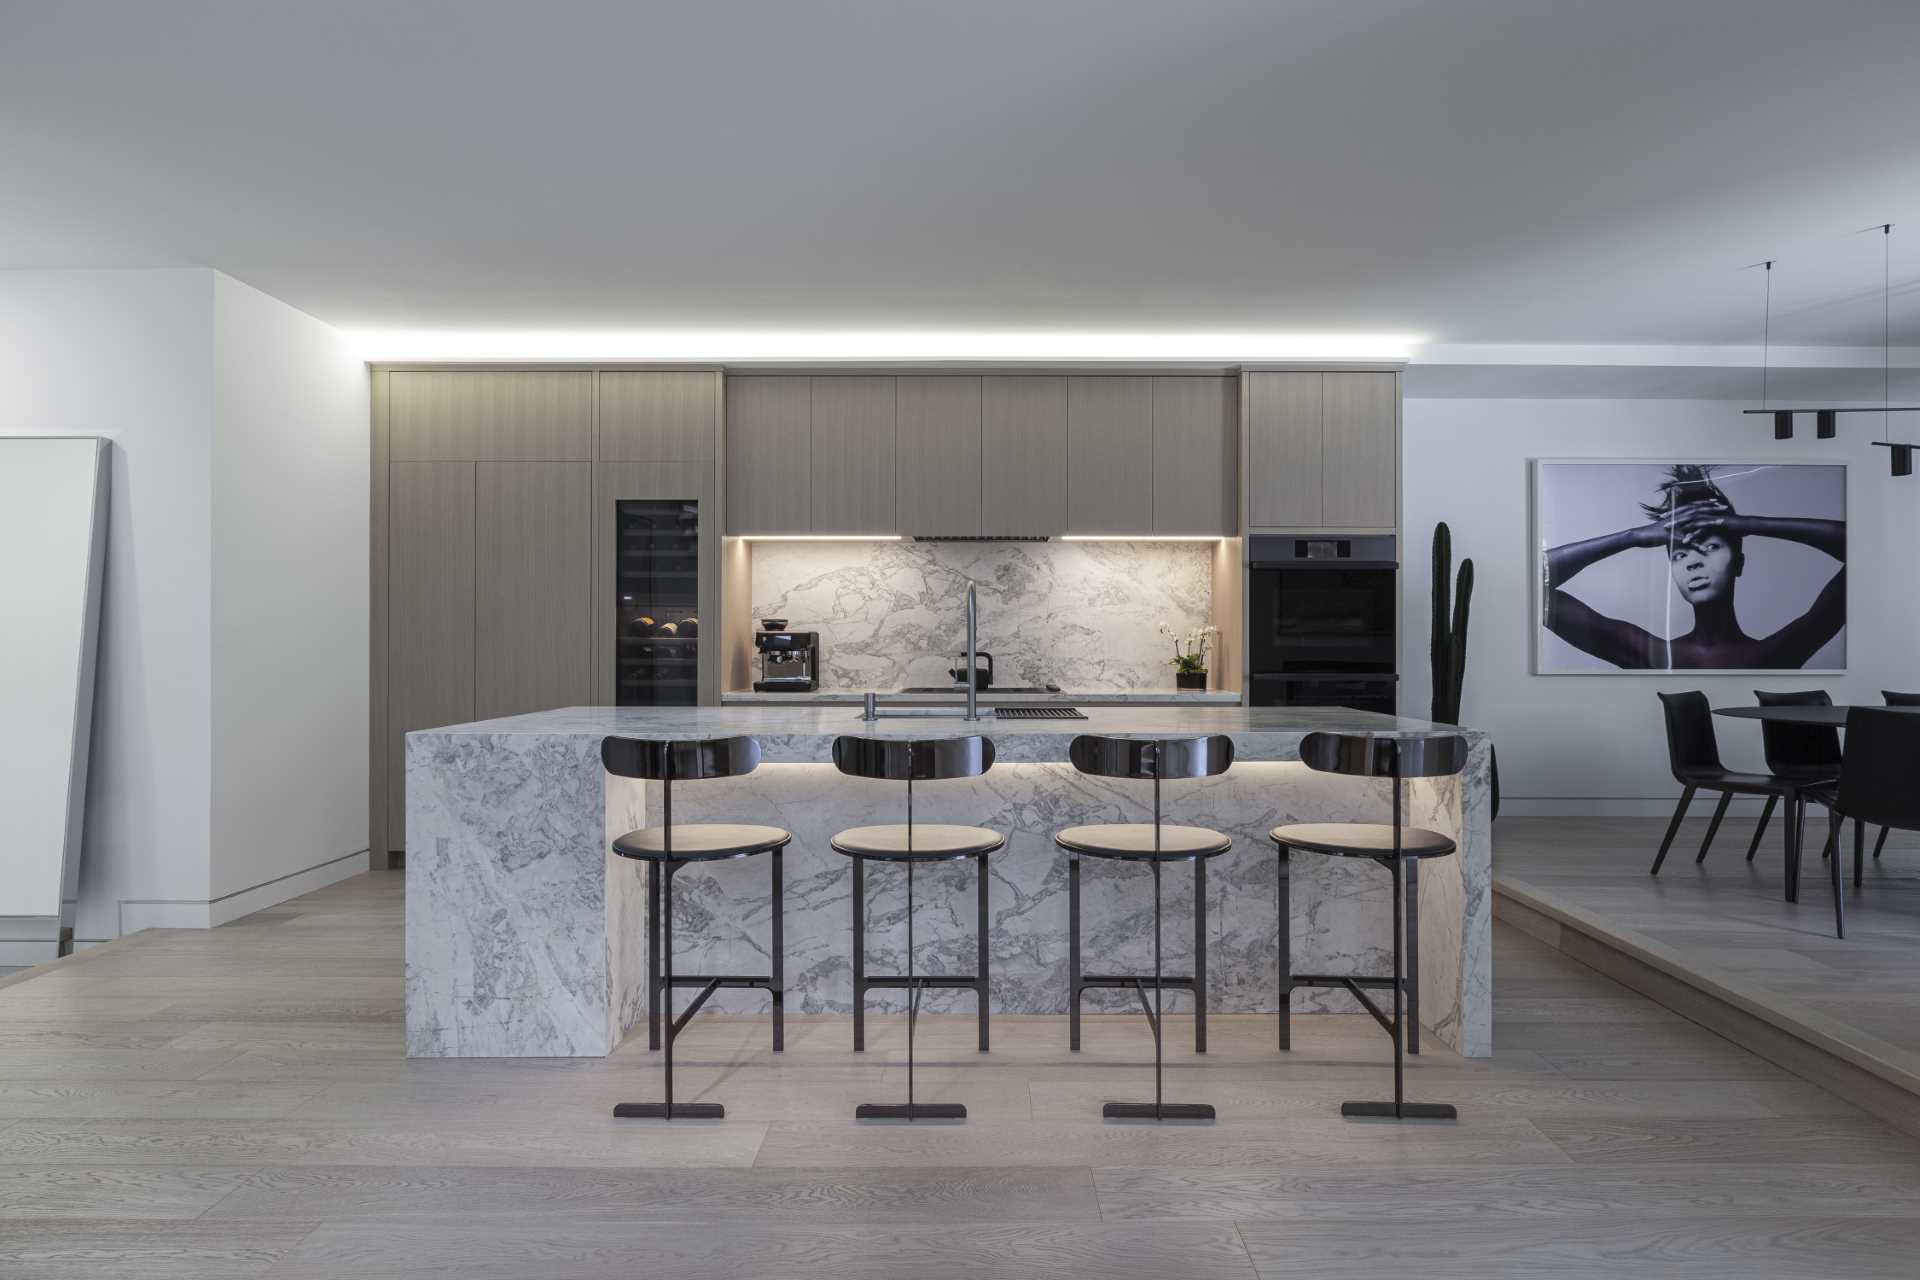 In the kitchen, a large island provides a place for seating, while the minimalist cabinets line the wall.